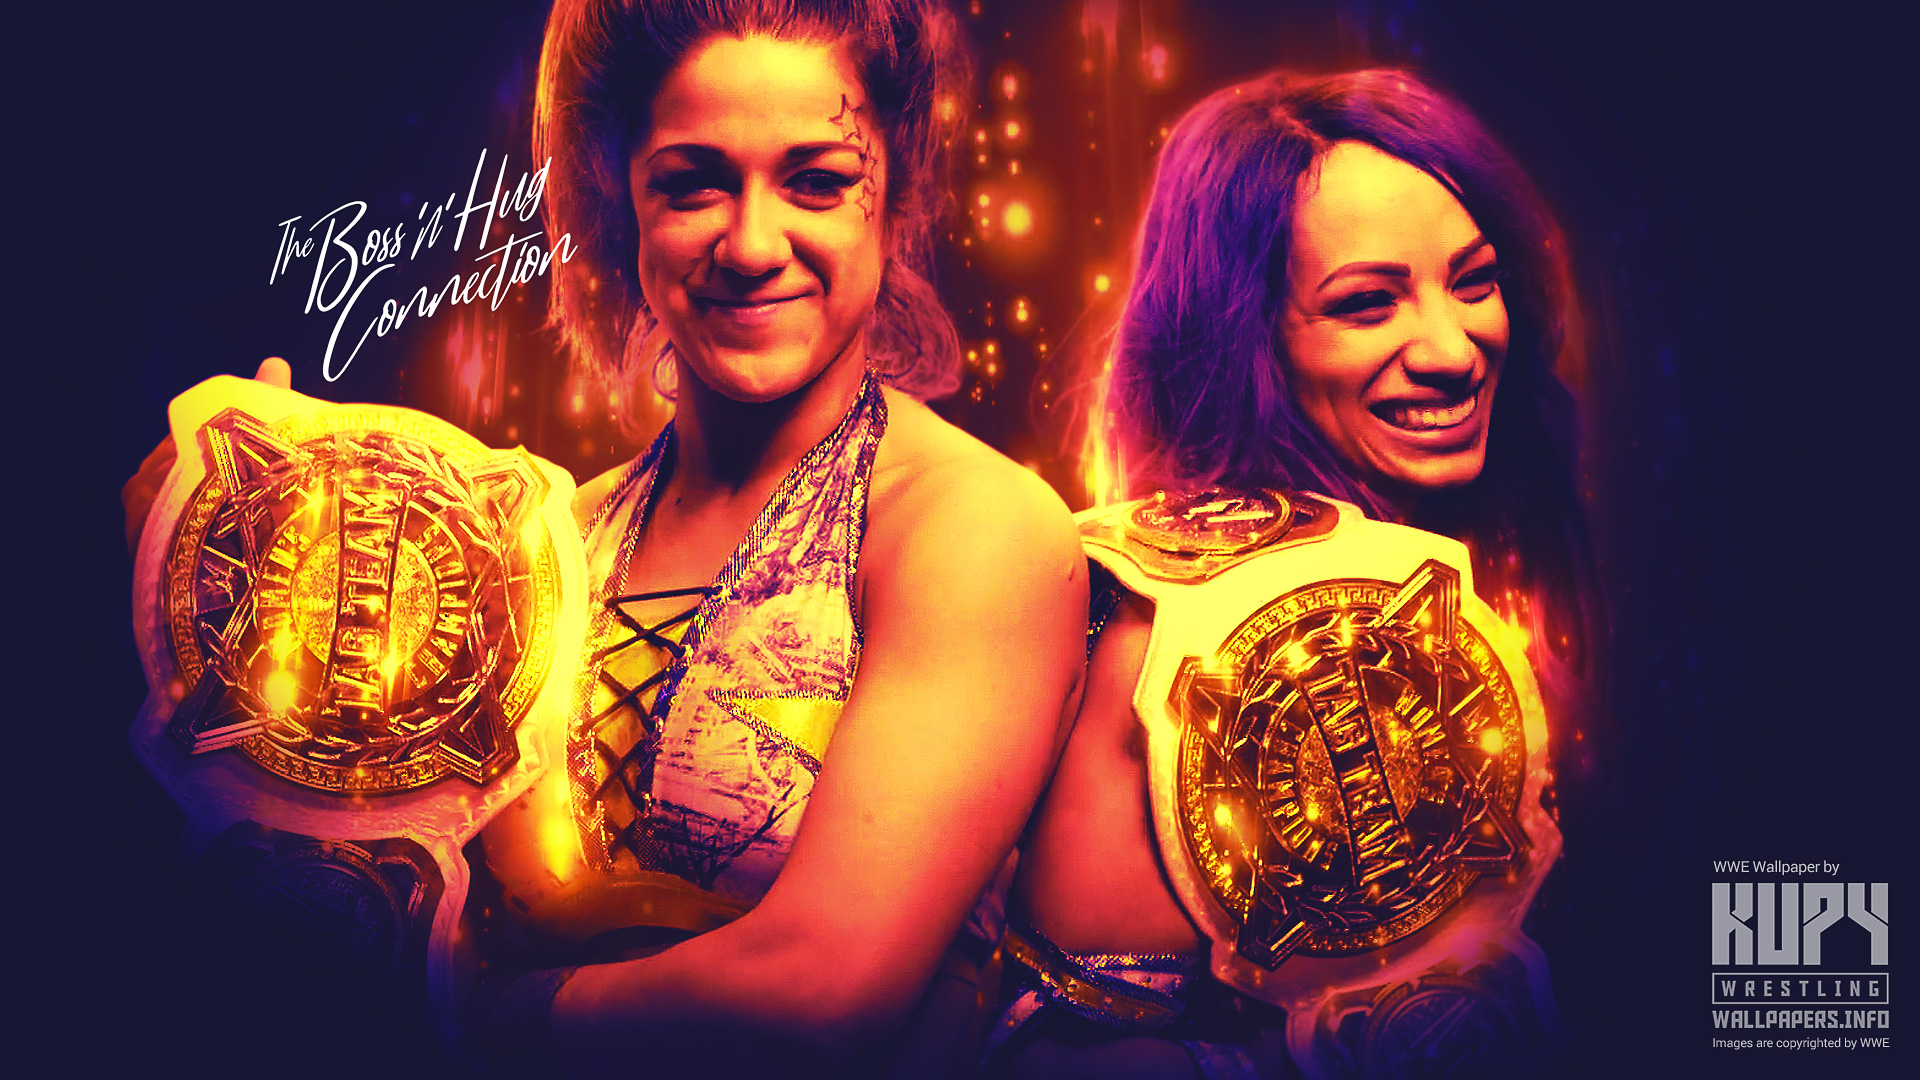 First-ever WWE Women's Tag Team Champions: The Boss 'N' Hug Connection  wallpaper - Kupy Wrestling Wallpapers